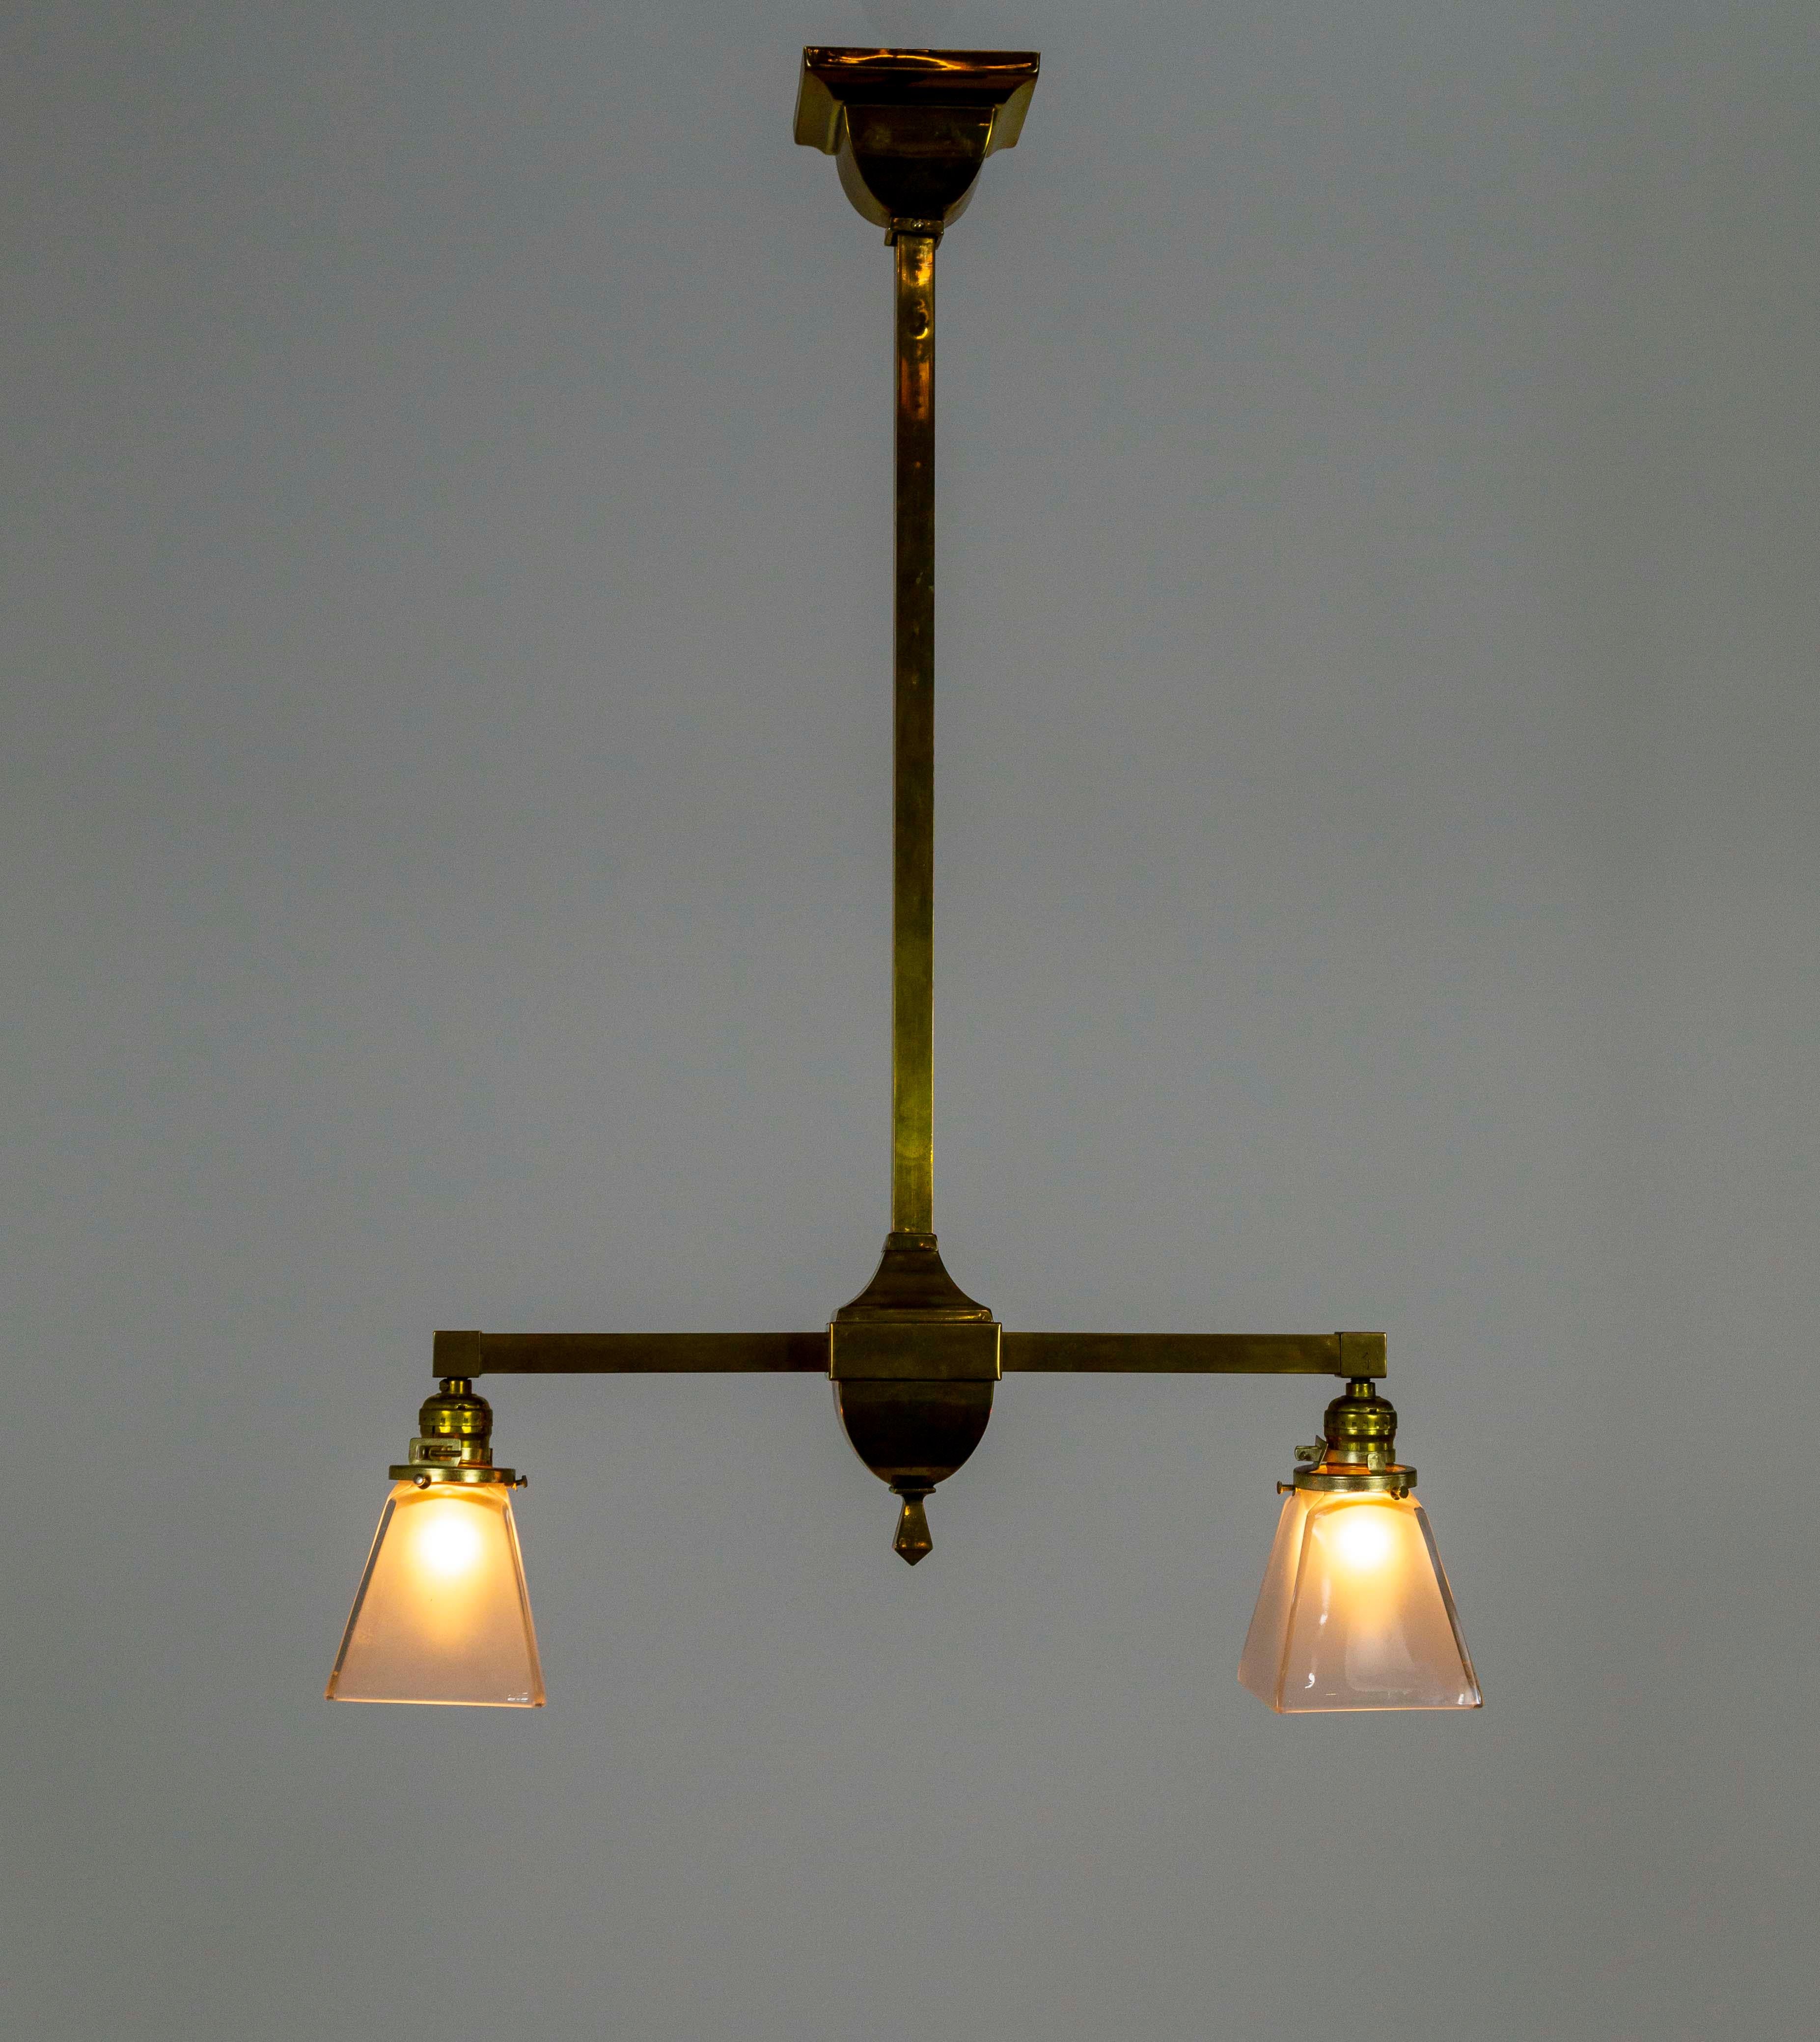 This simple, straight arm, brass chandelier is an excellent example of the Arts & Crafts movement. It has a streamlined design with squared stem and arms, and the brass itself has a lovely, patinated finish. The glass shades have a glossy exterior